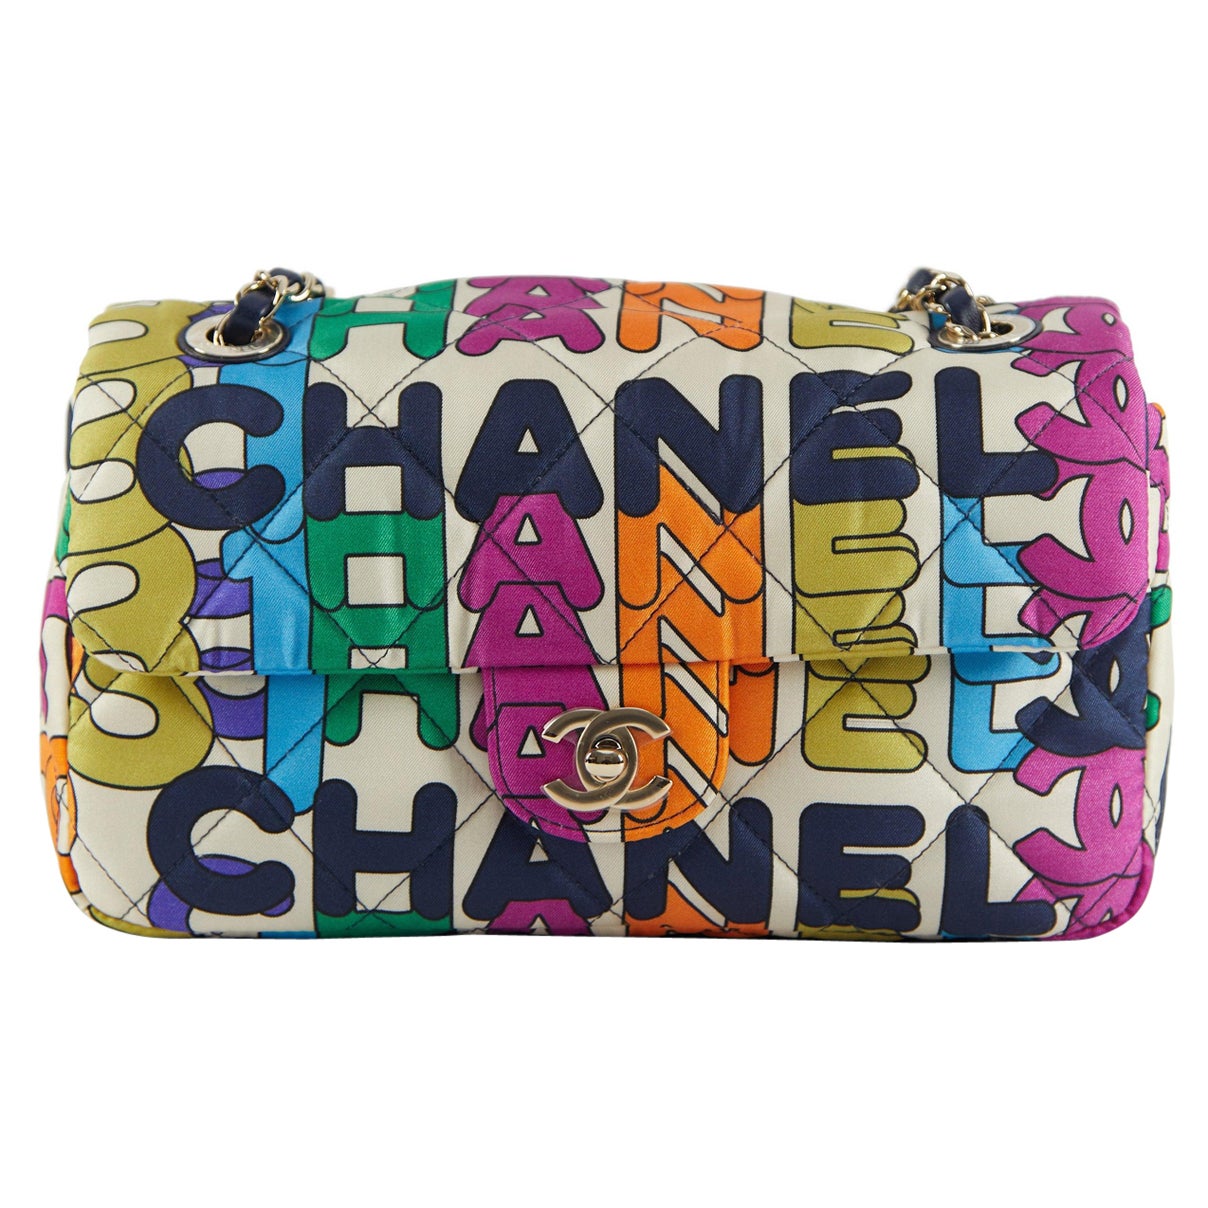 Chanel 21k - 5 For Sale on 1stDibs  chanel 21k collection, chanel 21k  price, chanel21k